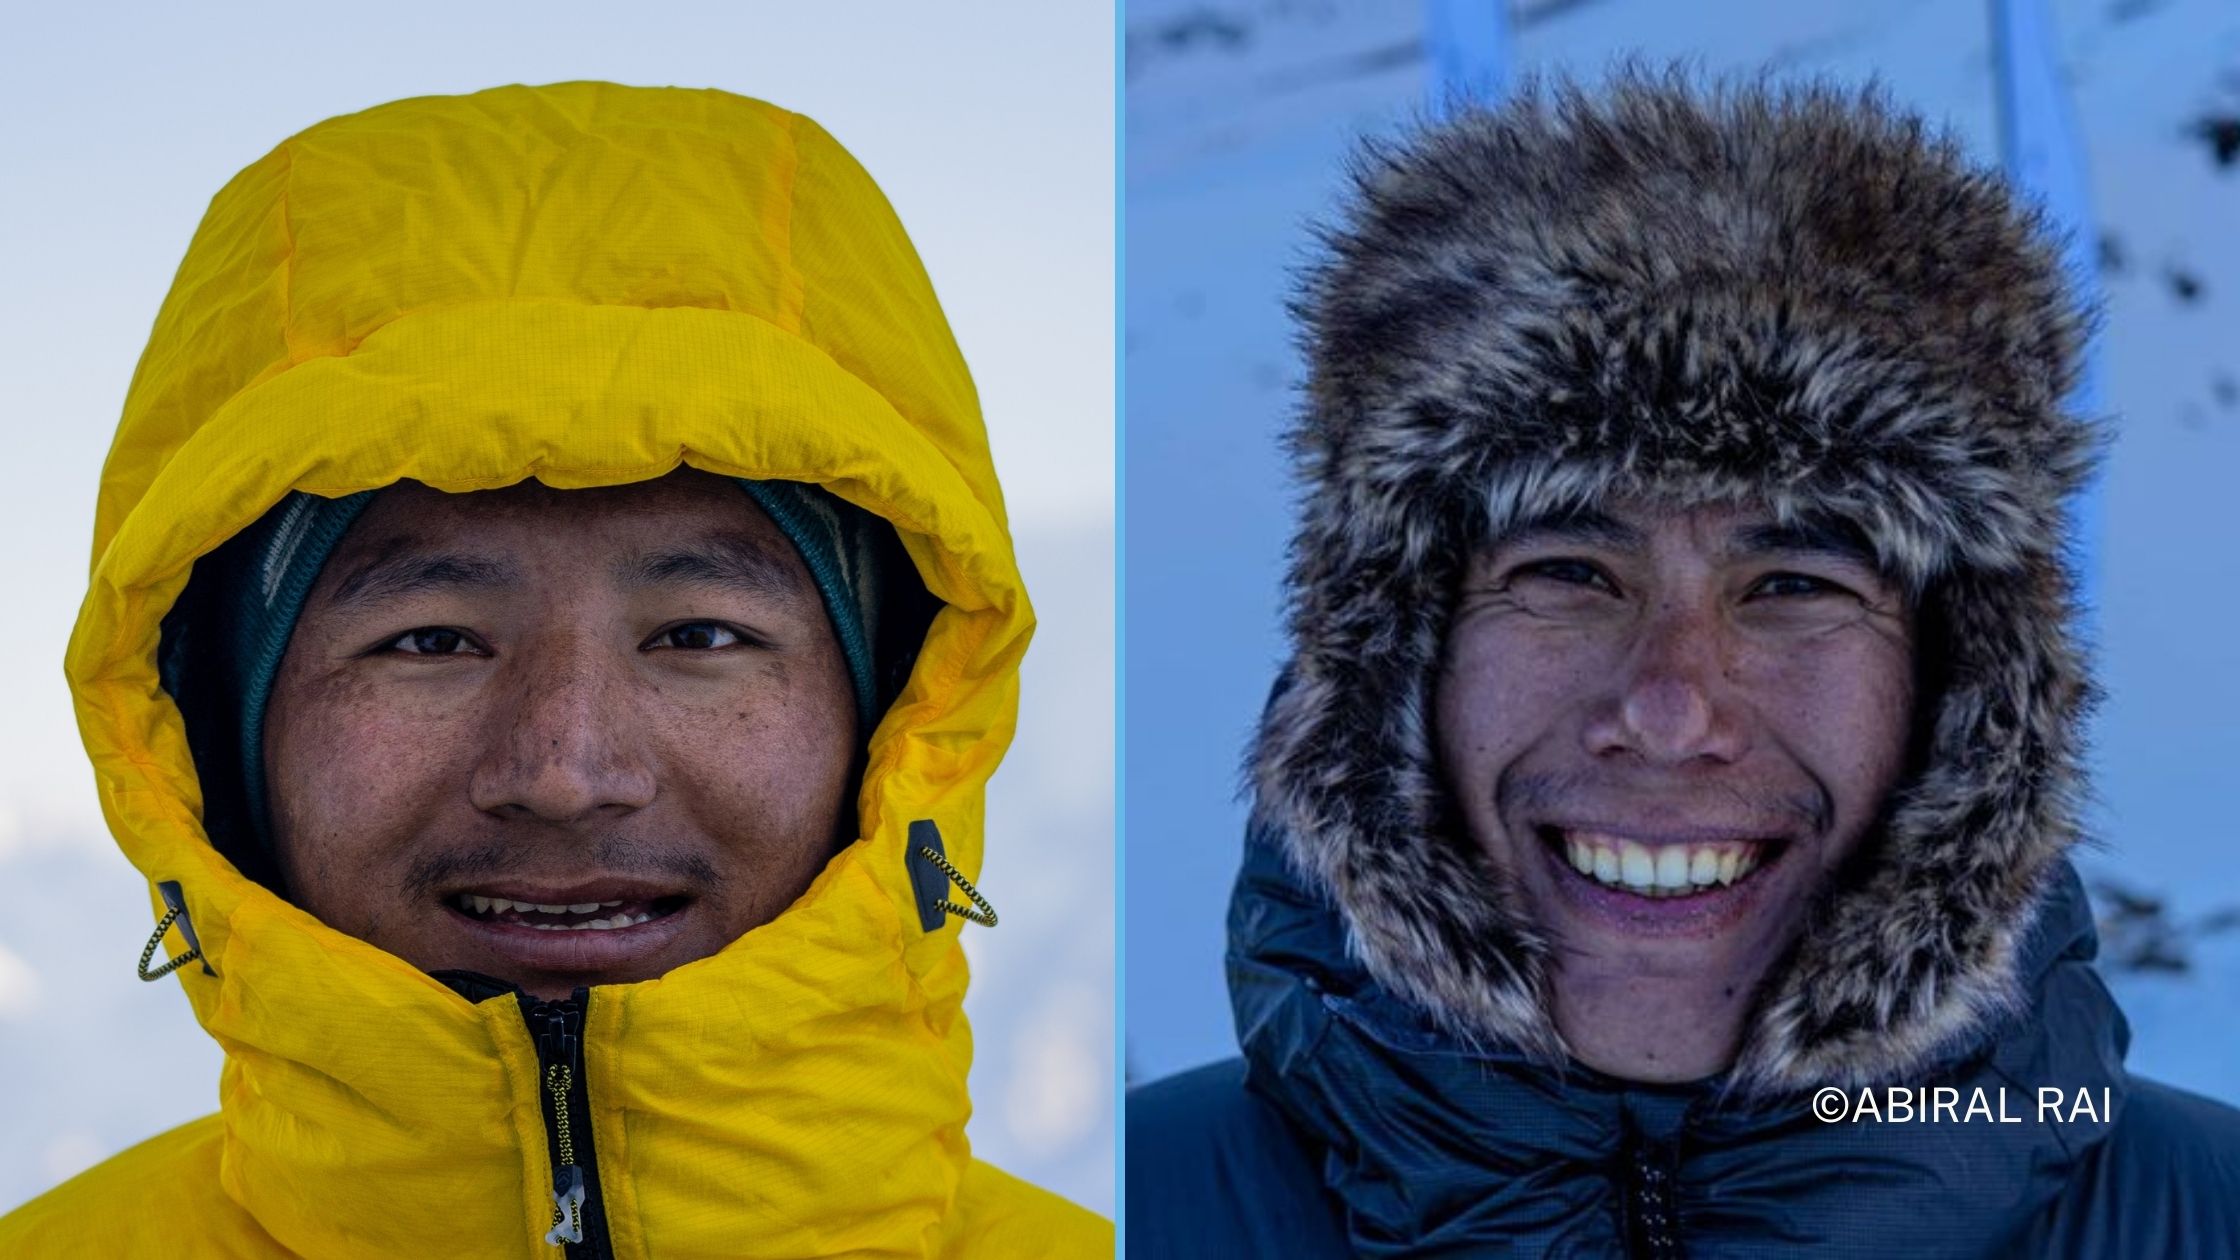 Two Nepali mountain guides on Mt Manaslu winter expedition in alpine style